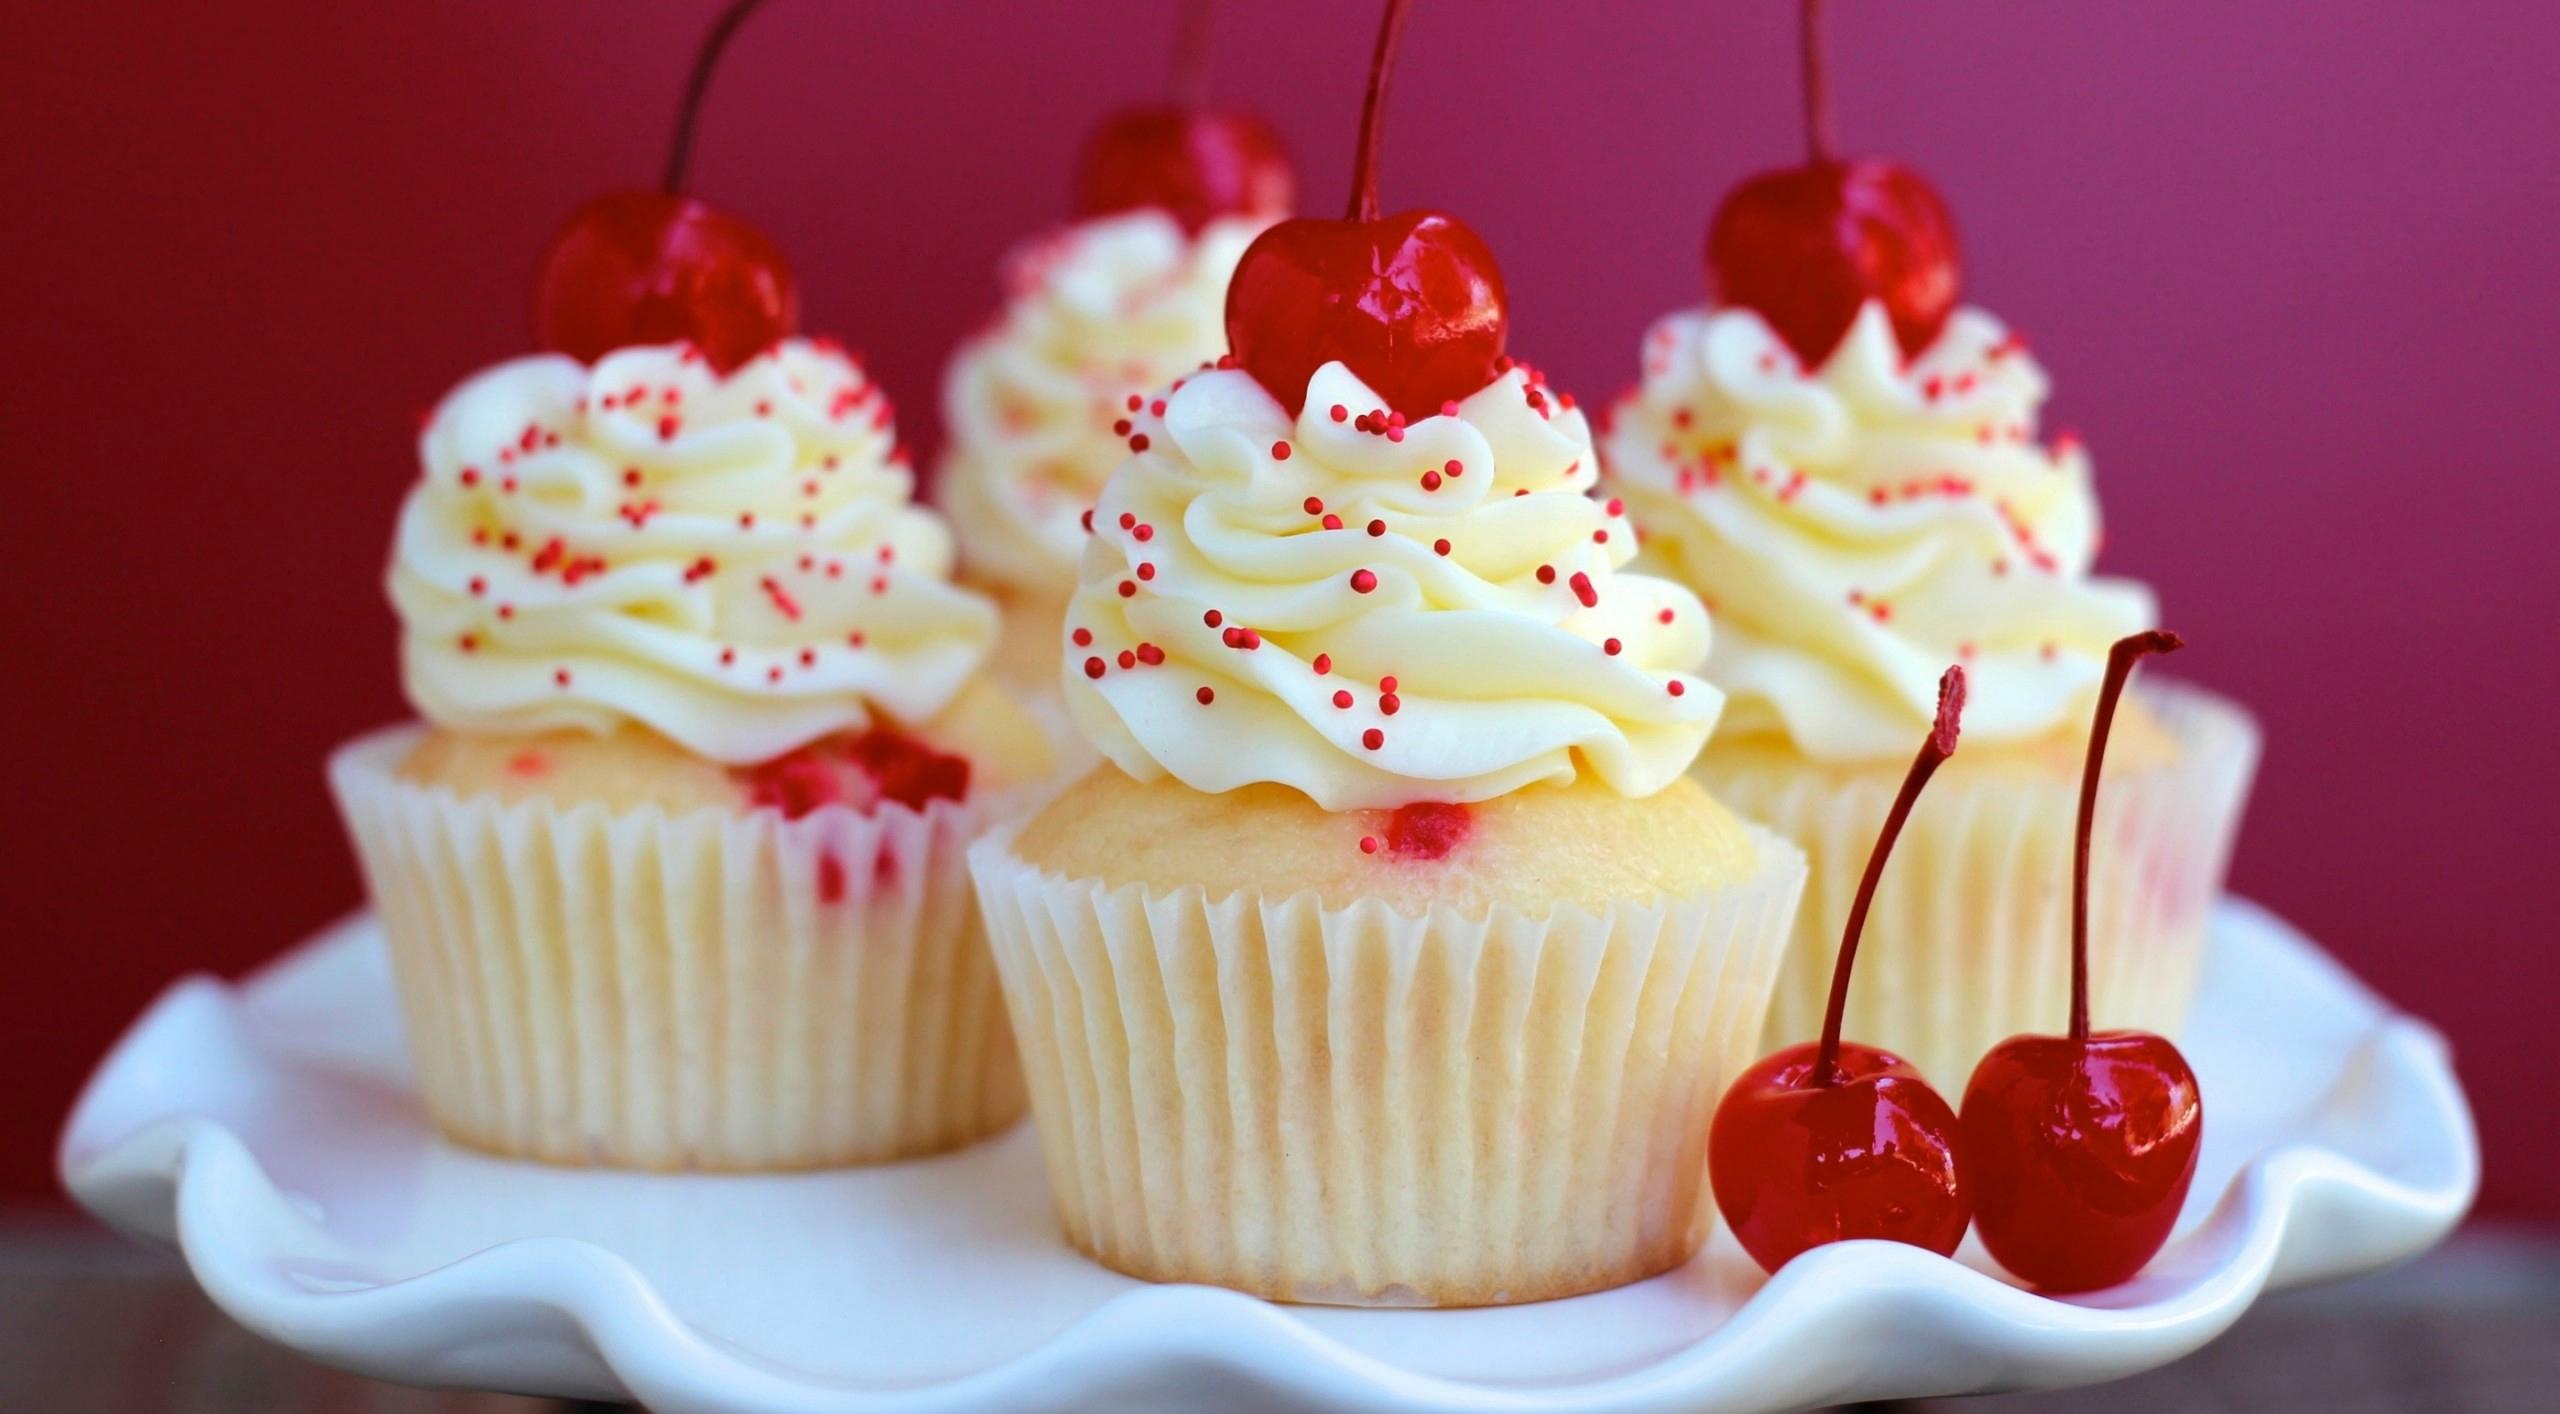 103298 download wallpaper food, desert, cherry, cupcakes screensavers and pictures for free